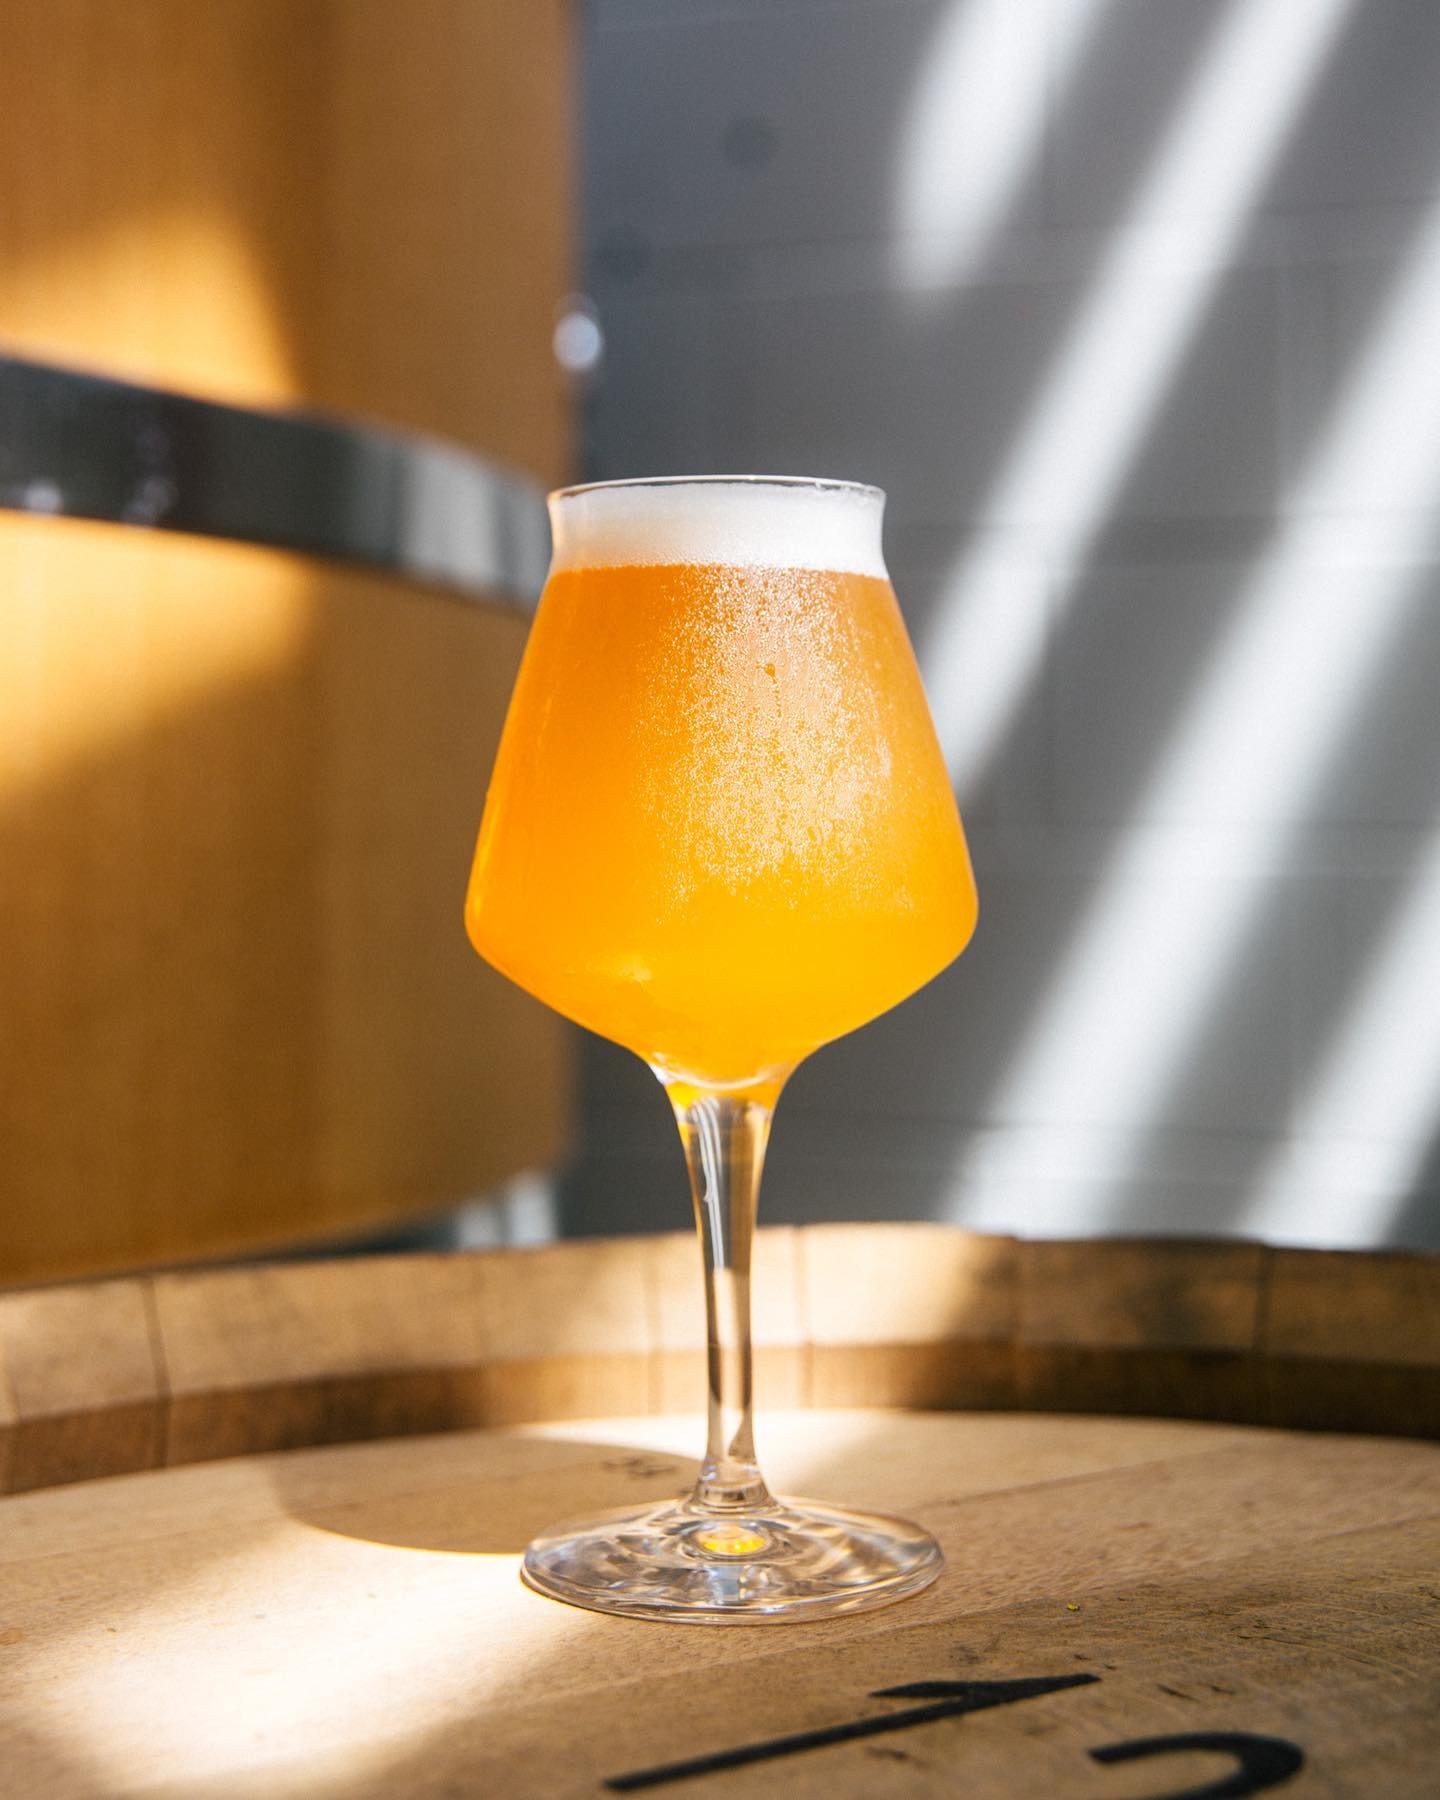 Check out our 100% Michigan Brett Beer &mdash;2023 Harvest Brett Pale Ale

6.5%

Our Brett Beer is hopped with 100% Michigan grown Cascade from our friends at @hopalliance in Omena. Wet whole leaf Cascade in the boil; and fresh AF Cascade pellets in 